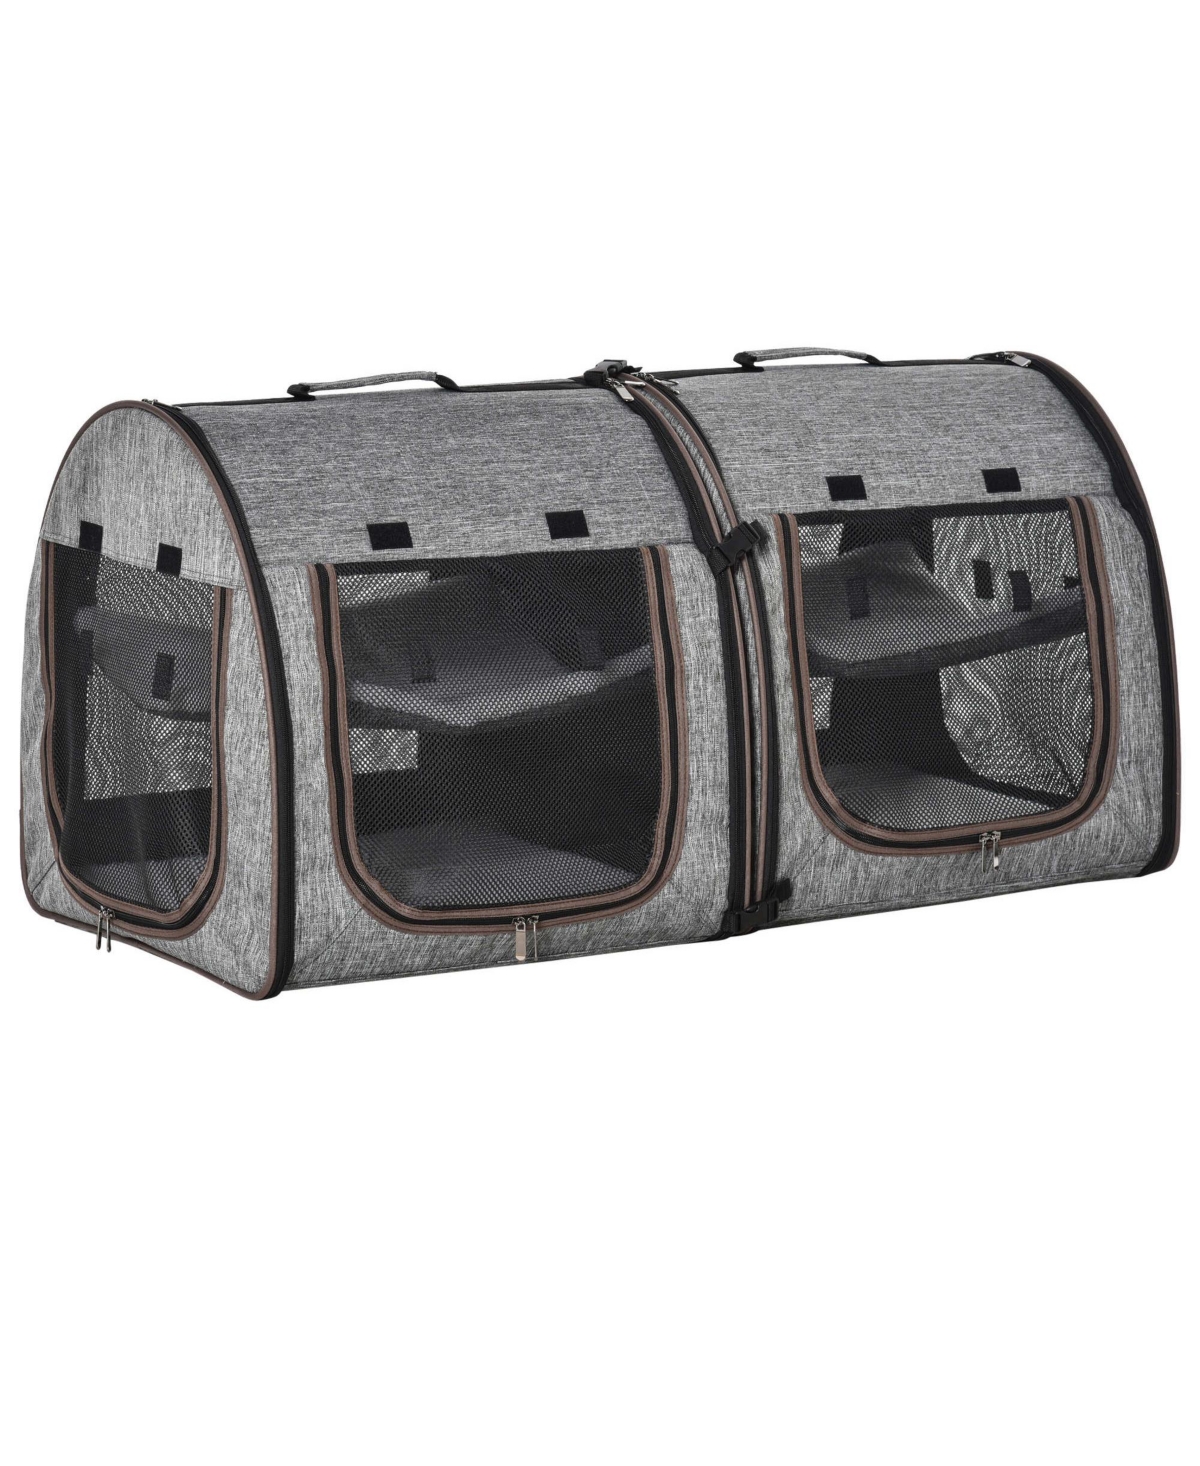 Large Portable Double Pet Carrier Kennel Bag Oxford Travel Car Seat - Grey